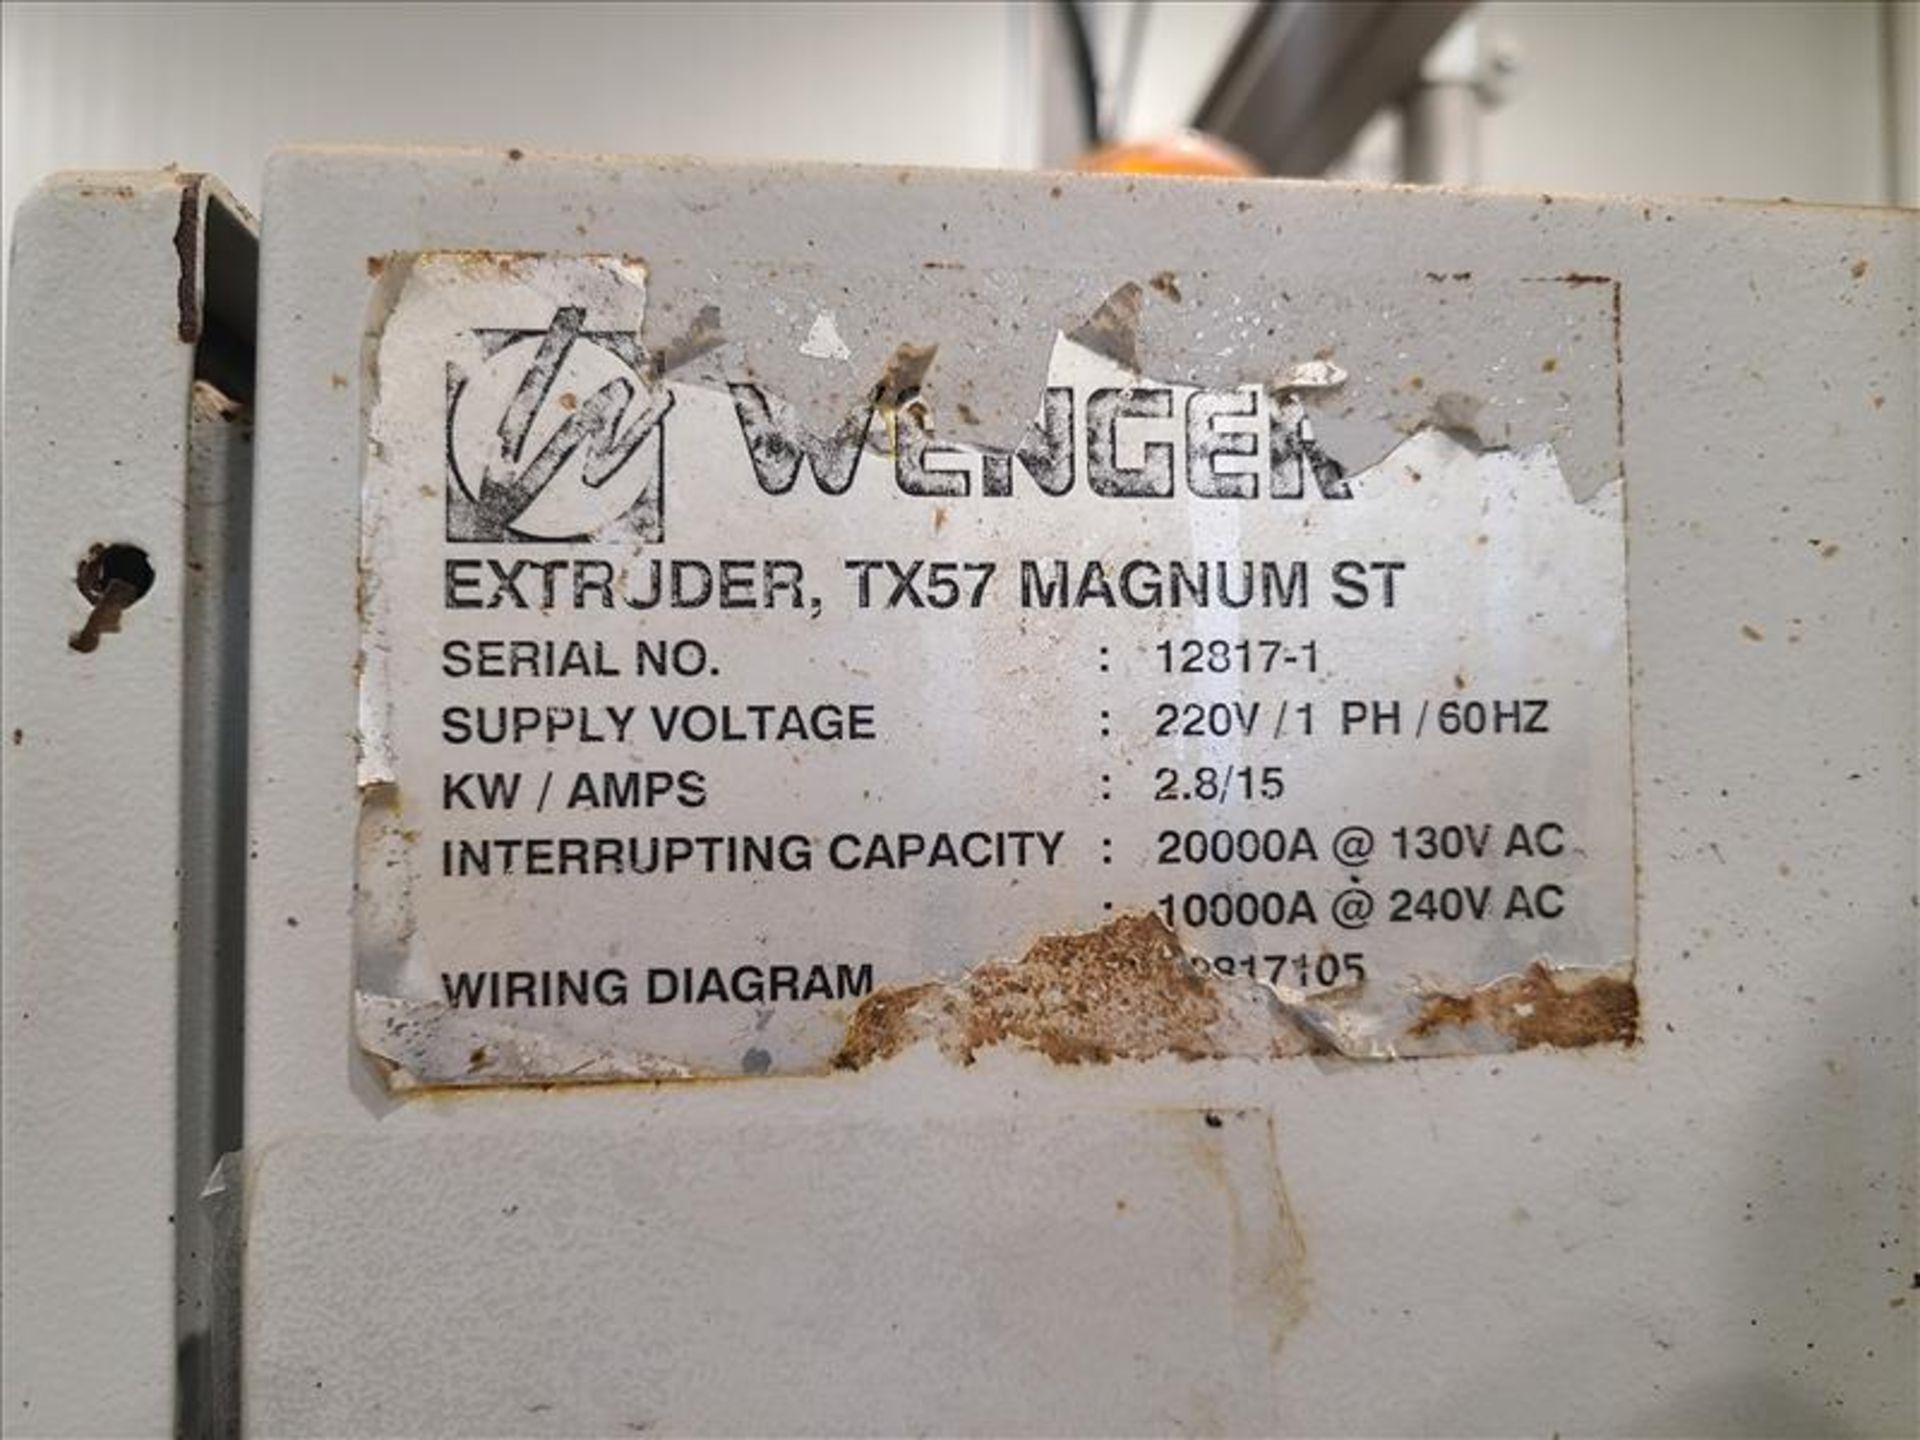 Wenger Twin Screw Extruder, mod. TX57, Magnum ST, ser. no. 12817-1, 16, 404 hours, 40 hp, 575 volts - Image 11 of 11